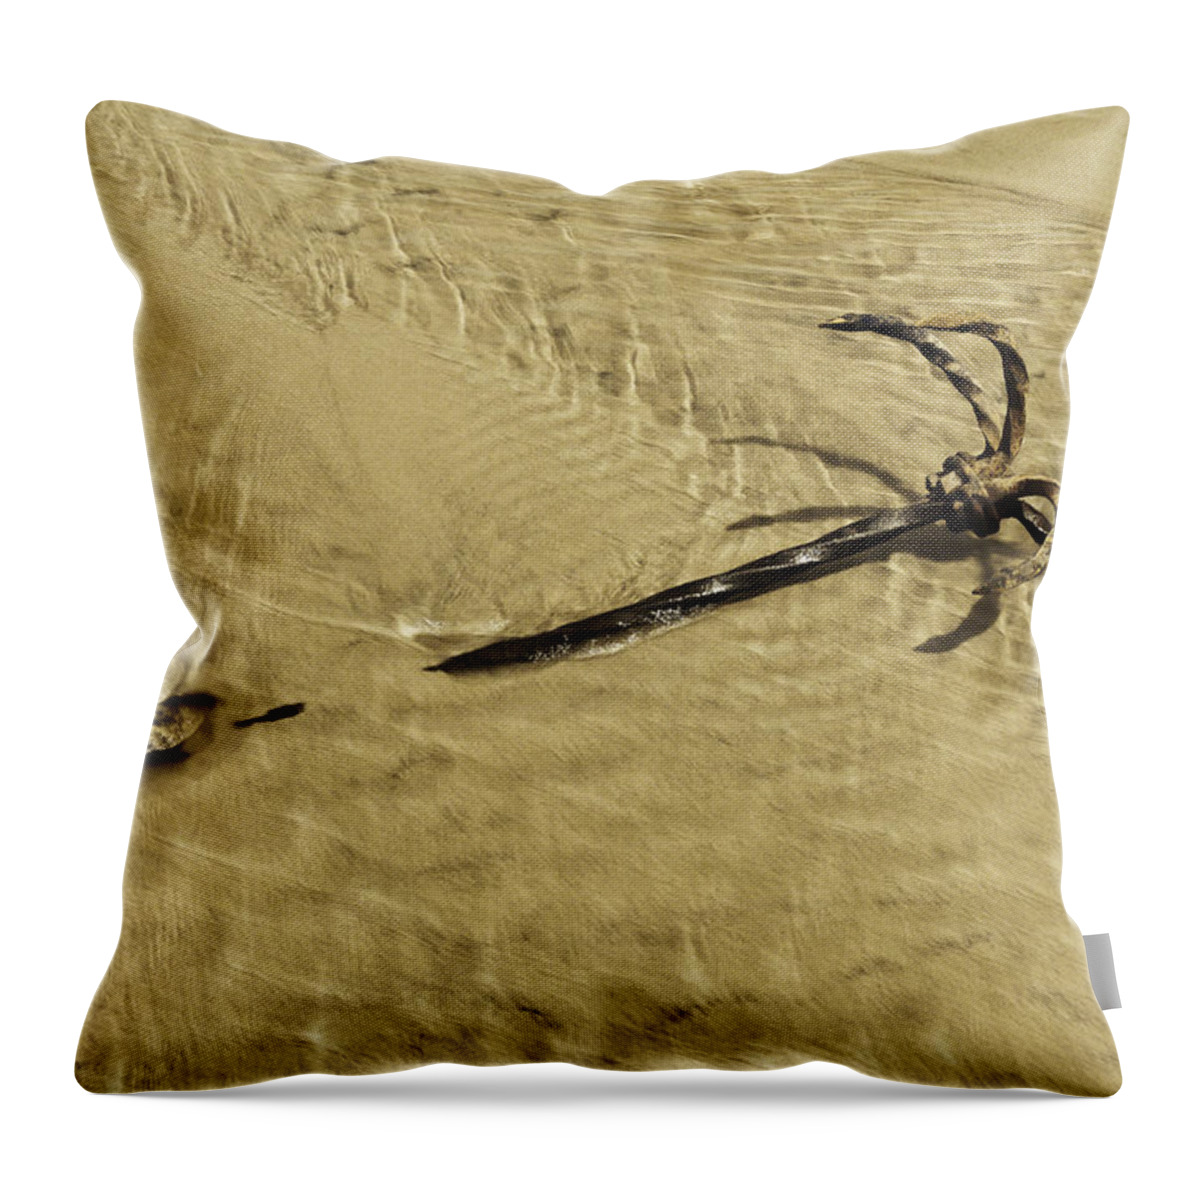 Anchors Throw Pillow featuring the photograph Anchor on sandy beach by Patrick Kain